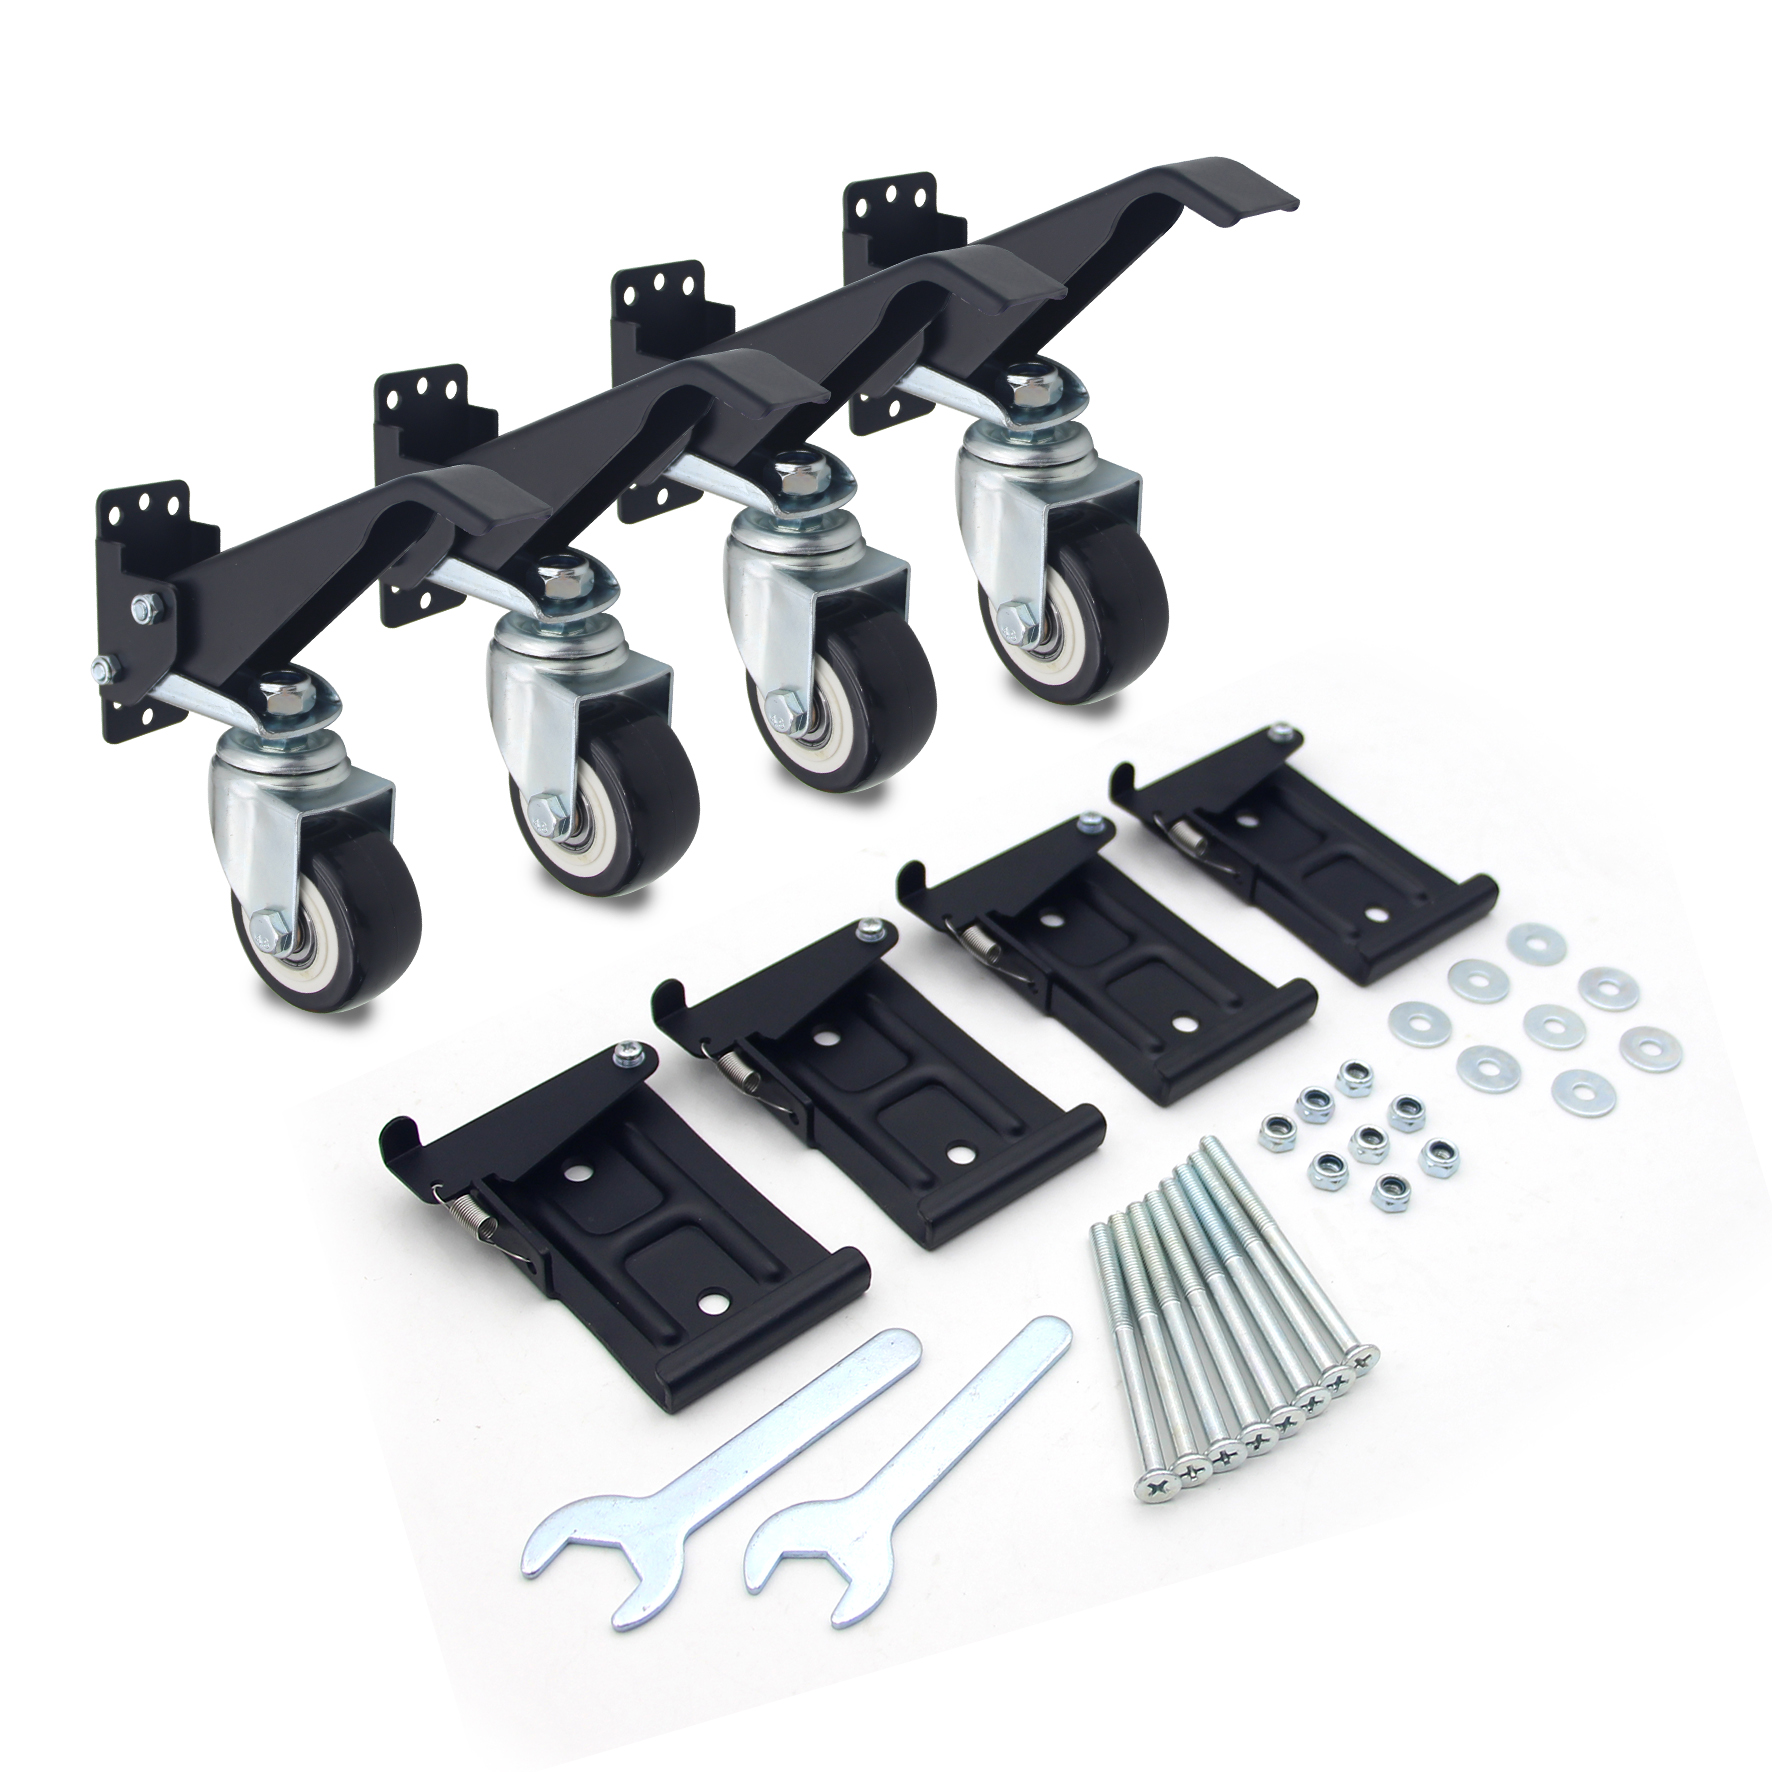 Workbench Caster kit 4 Heavy Duty Retractable Casters with 4 Spring Lock Quic... 